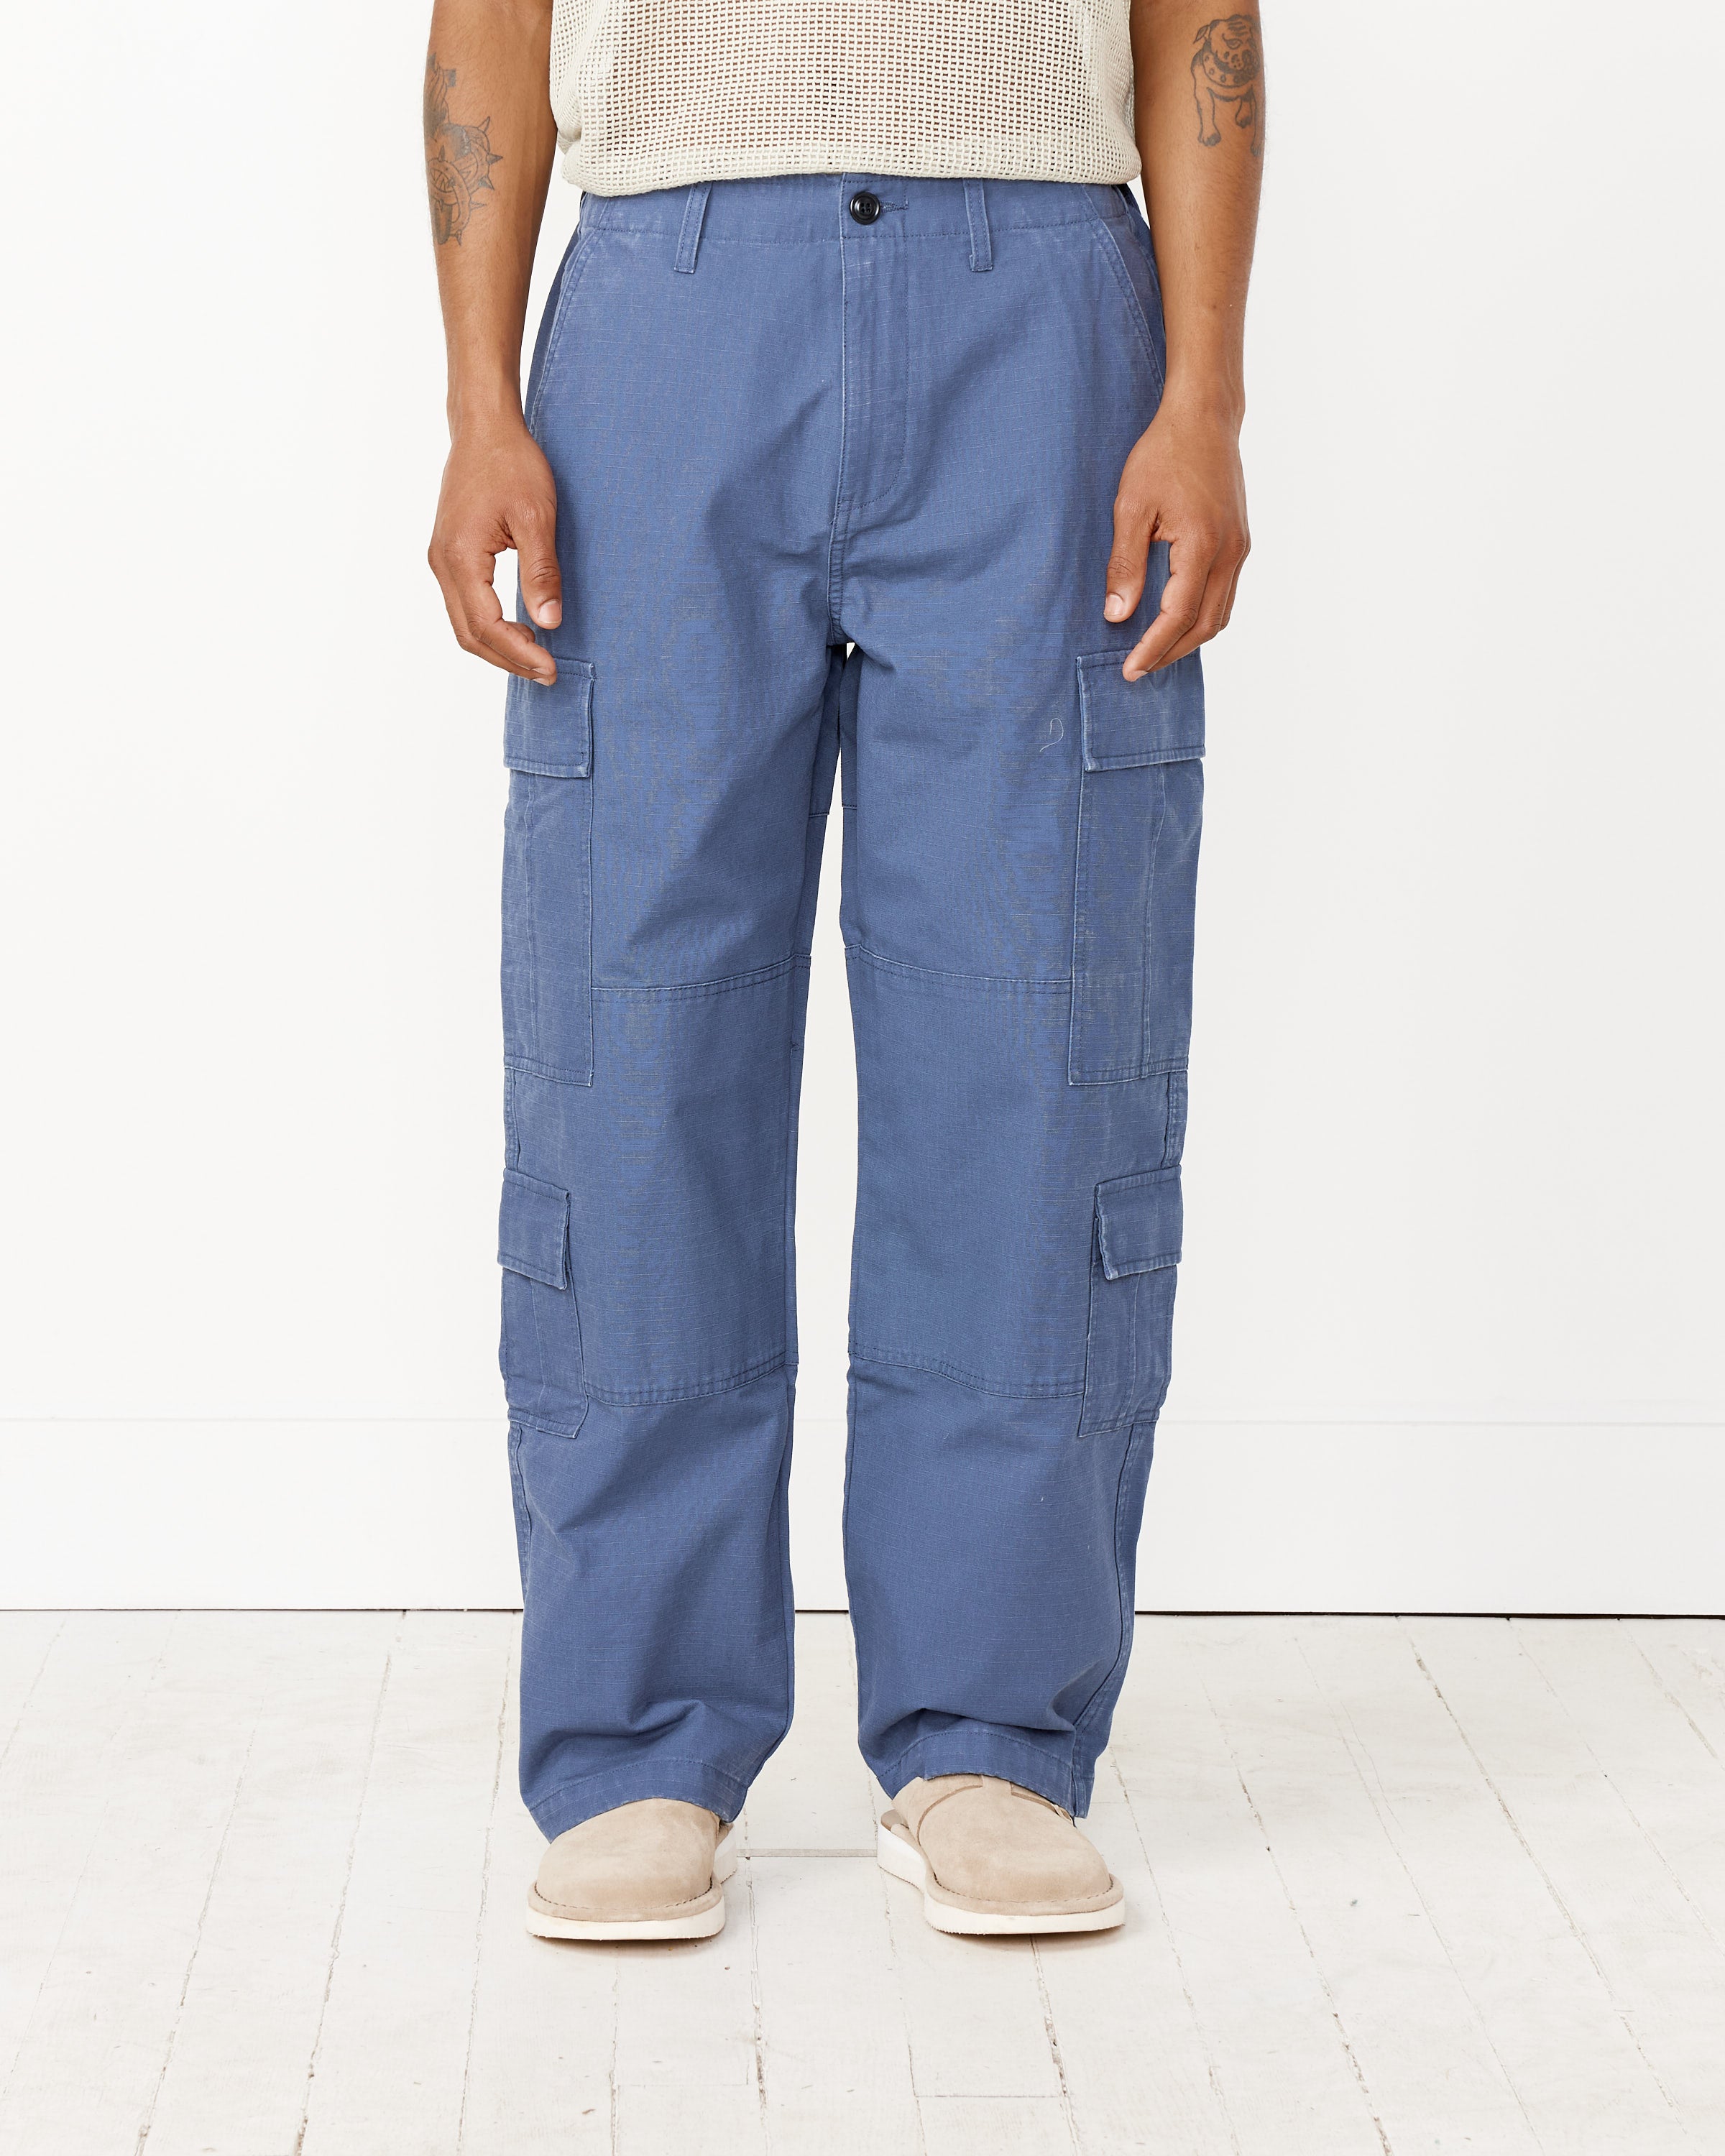 Ripstop Surplus Cargo in Washed Blue